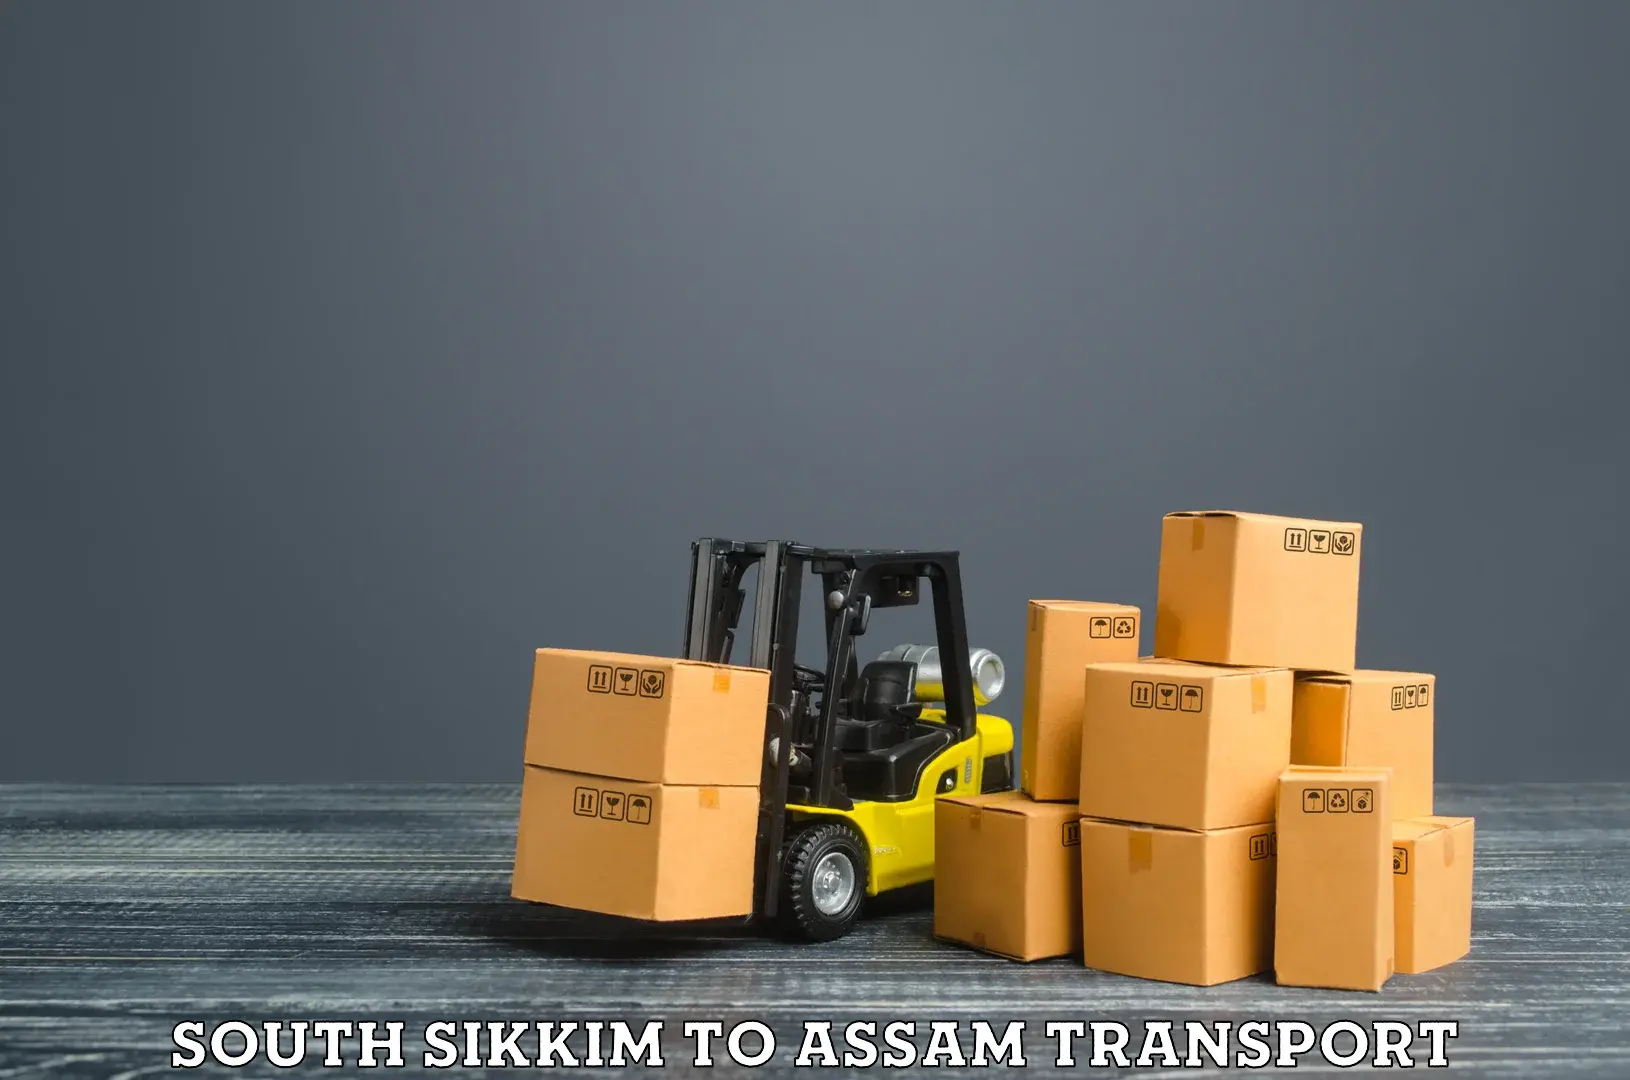 Two wheeler transport services South Sikkim to Dhupdhara